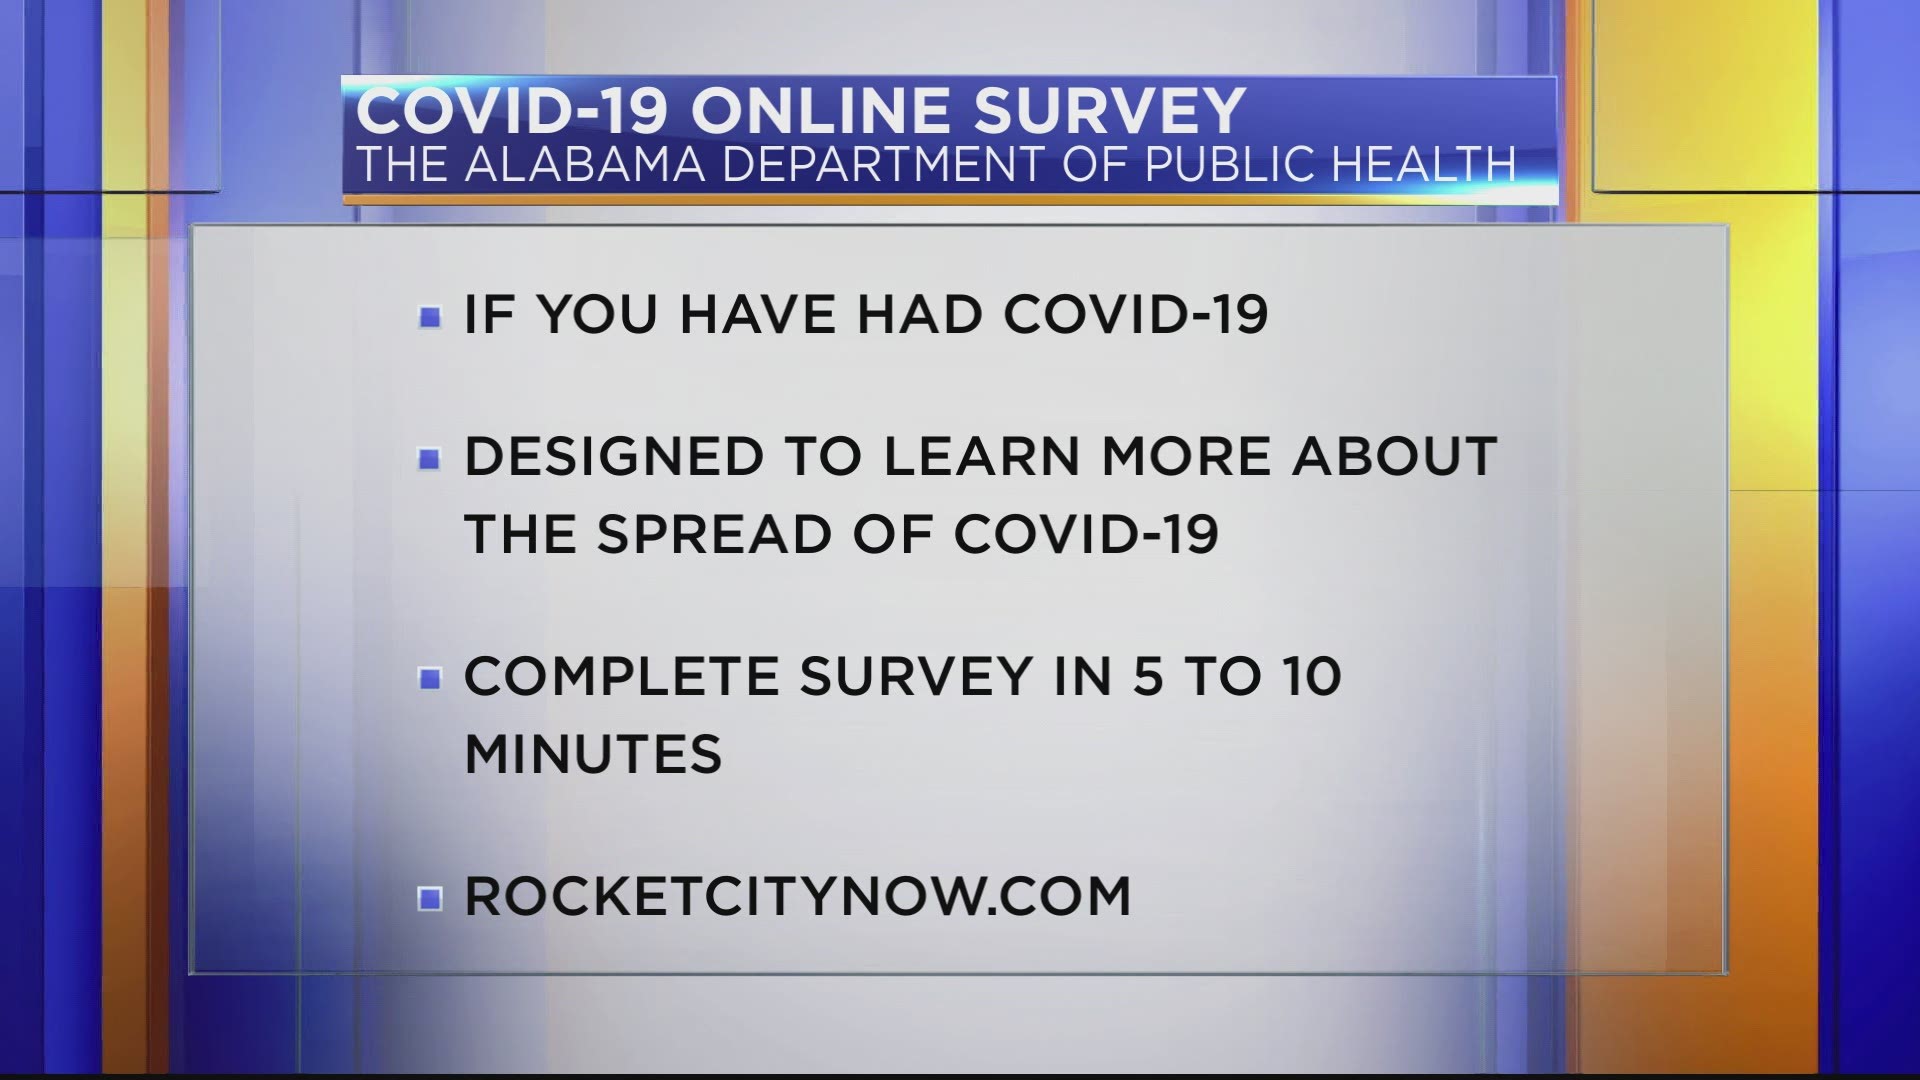 ADPH is asking that Alabamians who have tested positive for COVID-19 at any point take the survey.